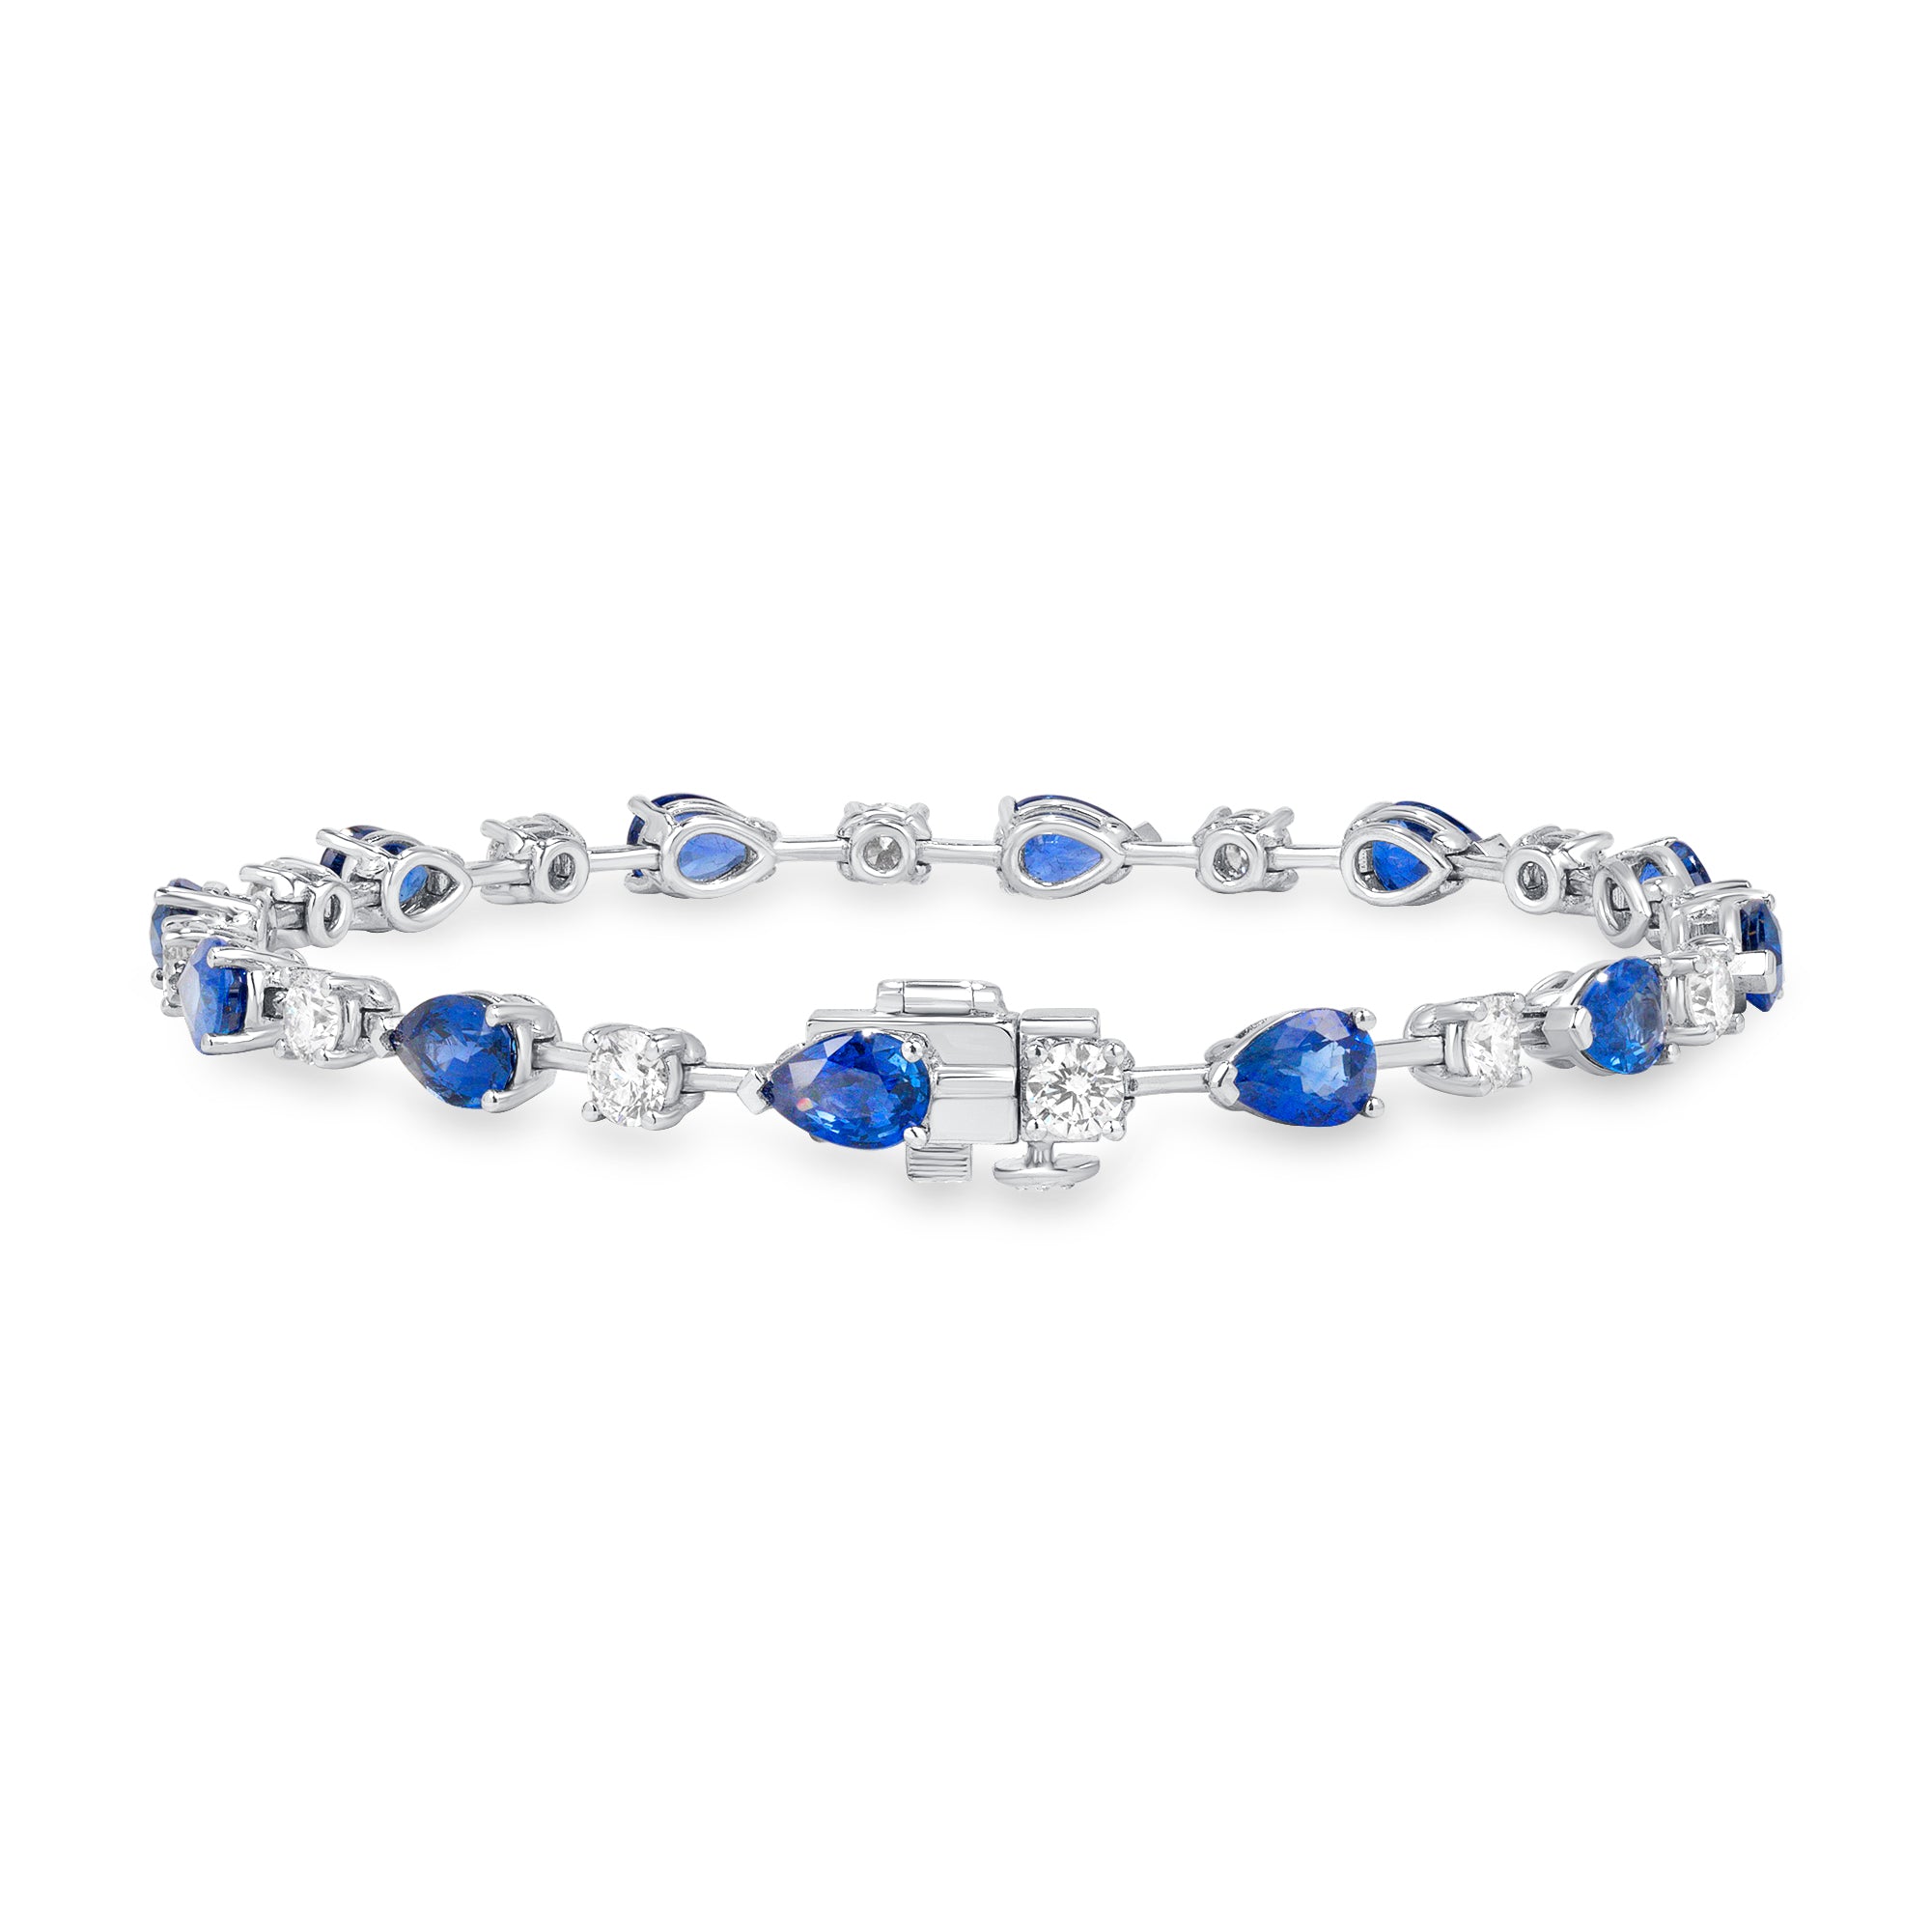 8.31ctw Alternating East-West Pear Cut Sapphire and Round Brilliant Cut Diamond Tennis Bracelet in 18K White Gold